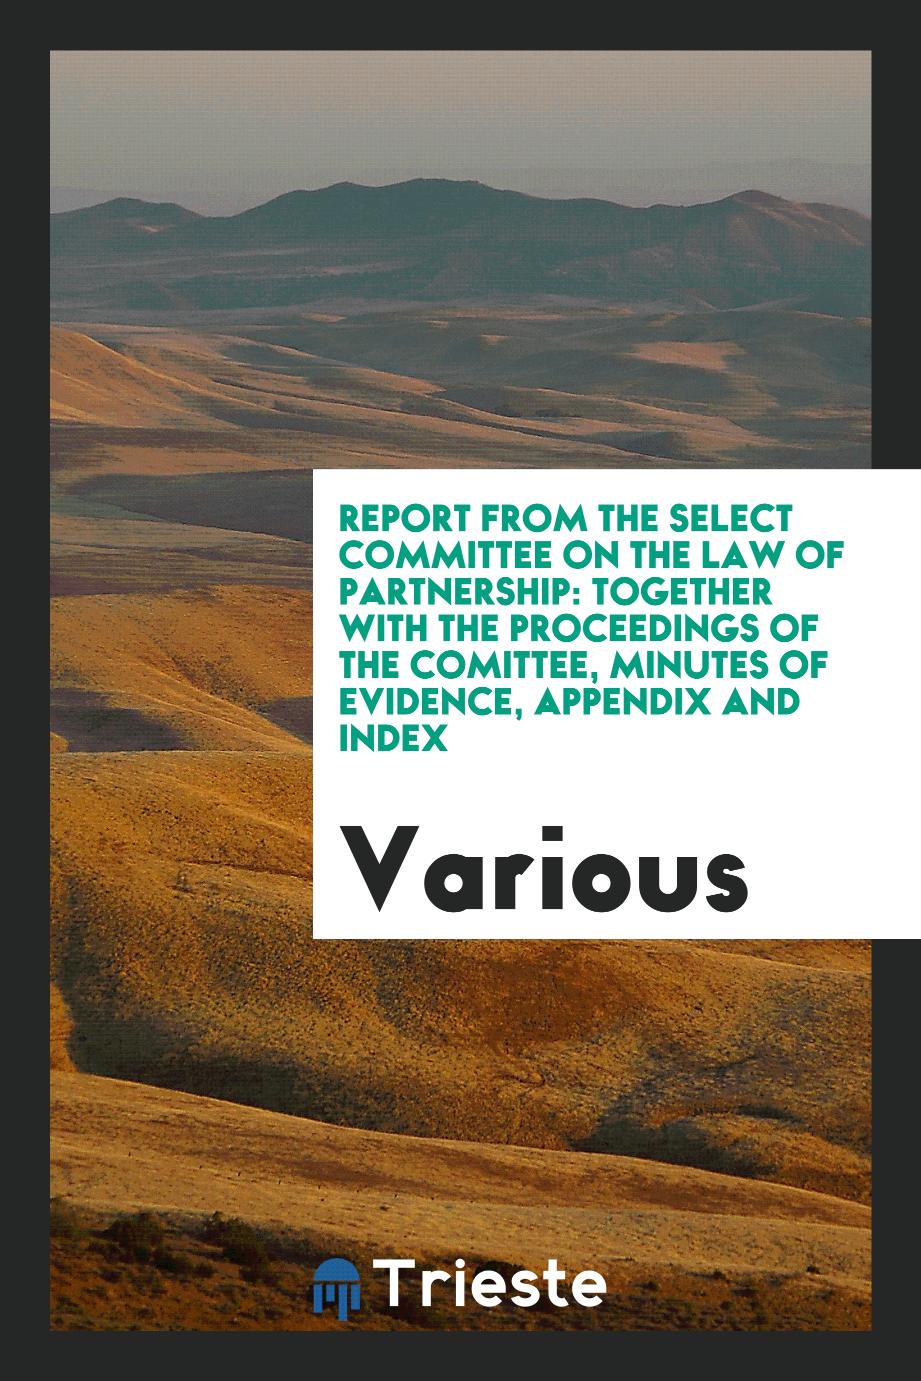 Report from the Select Committee on the Law of Partnership: Together with the Proceedings of the Comittee, Minutes of Evidence, Appendix and Index